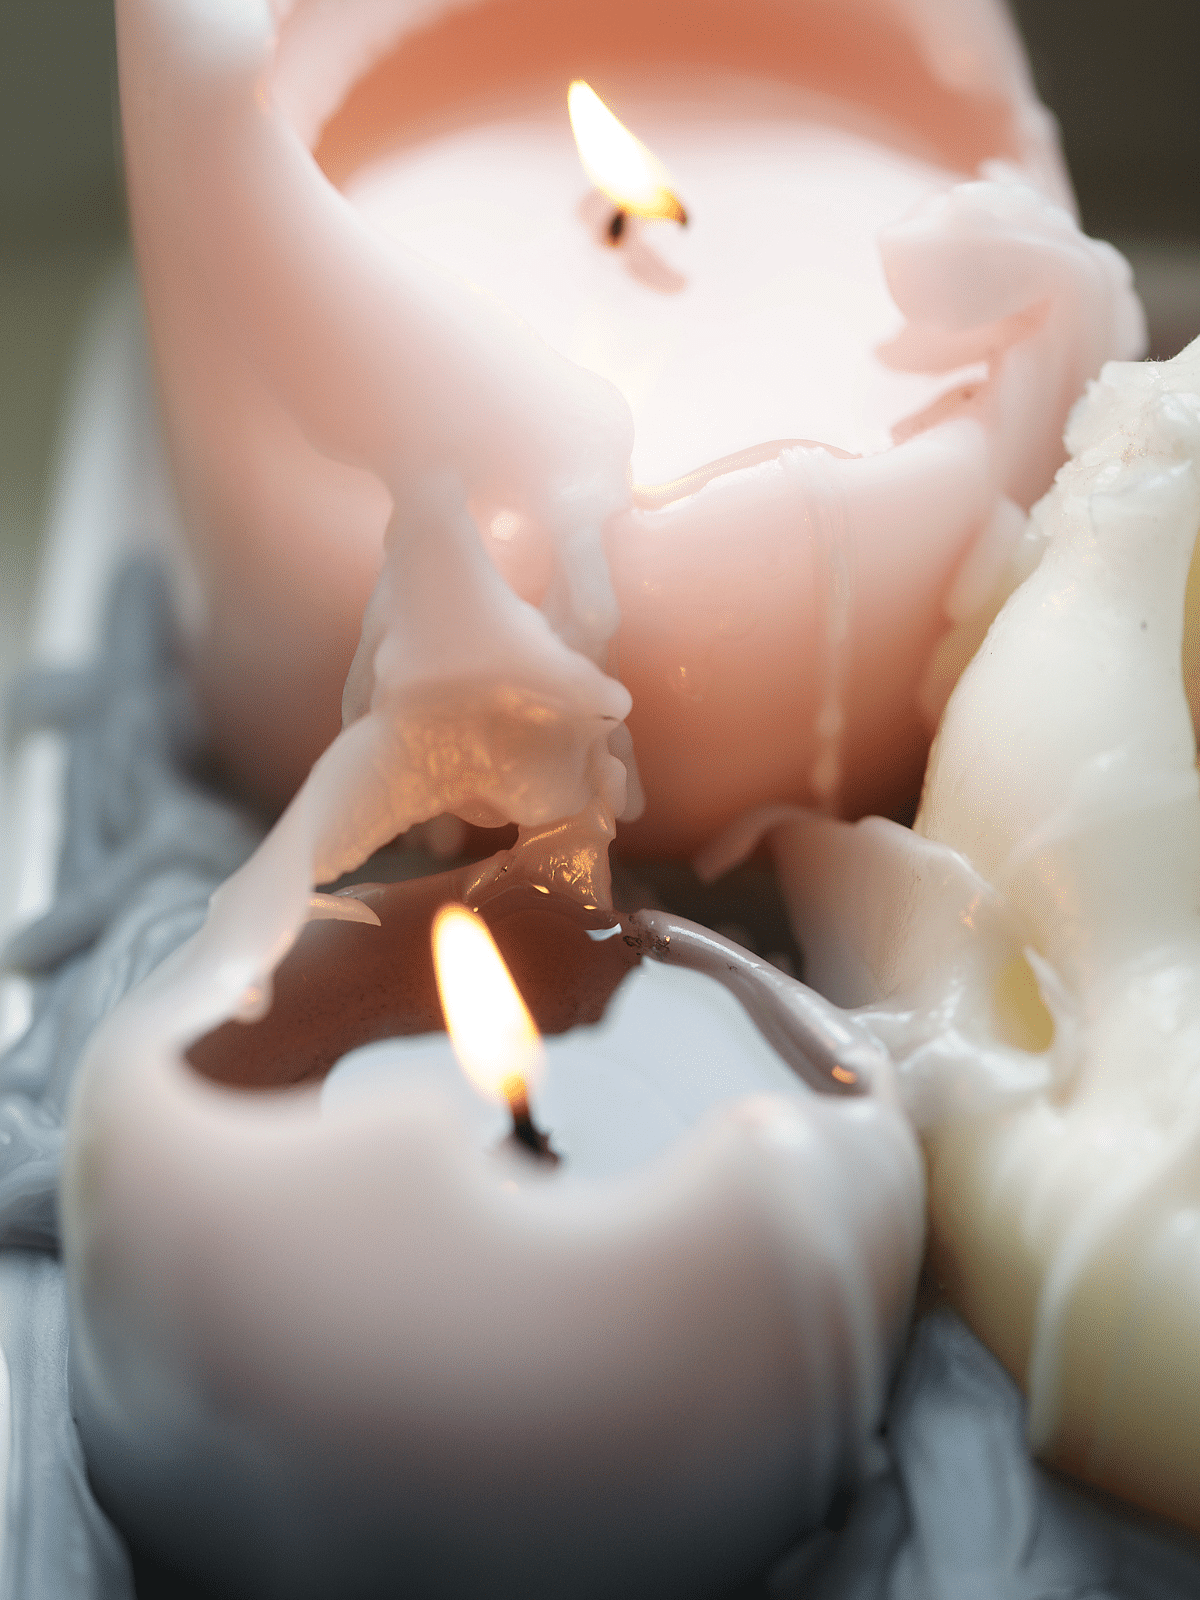 How To Get Out Candle Wax From Carpet + Remove Stain Easily